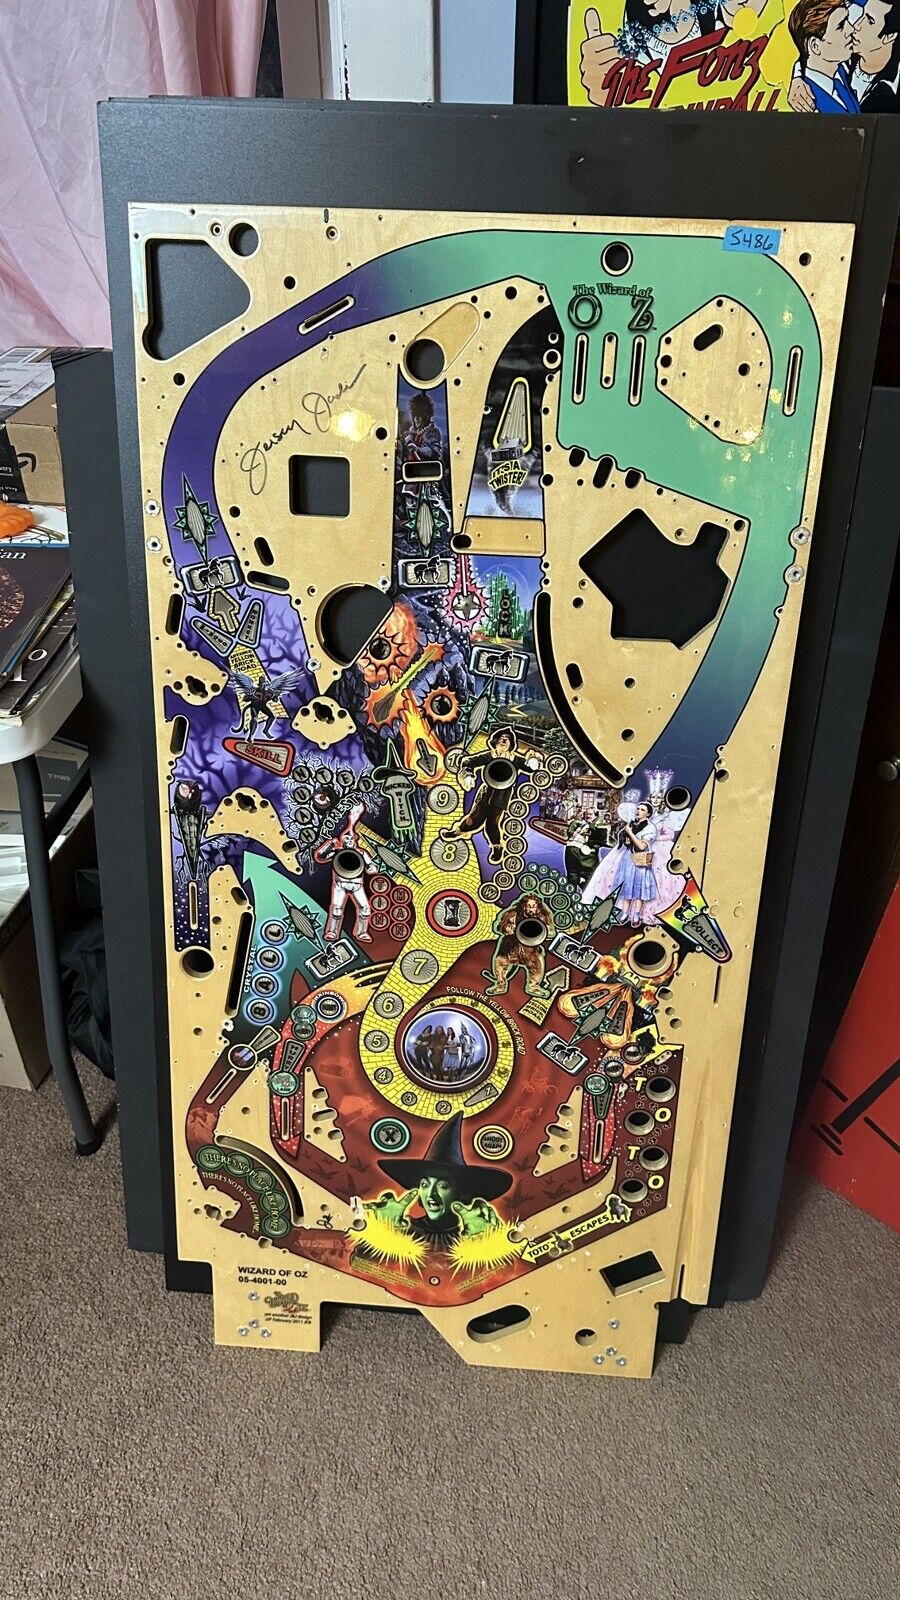 JJP Wizard Of Oz New pinball playfield signed by Jersey Jack